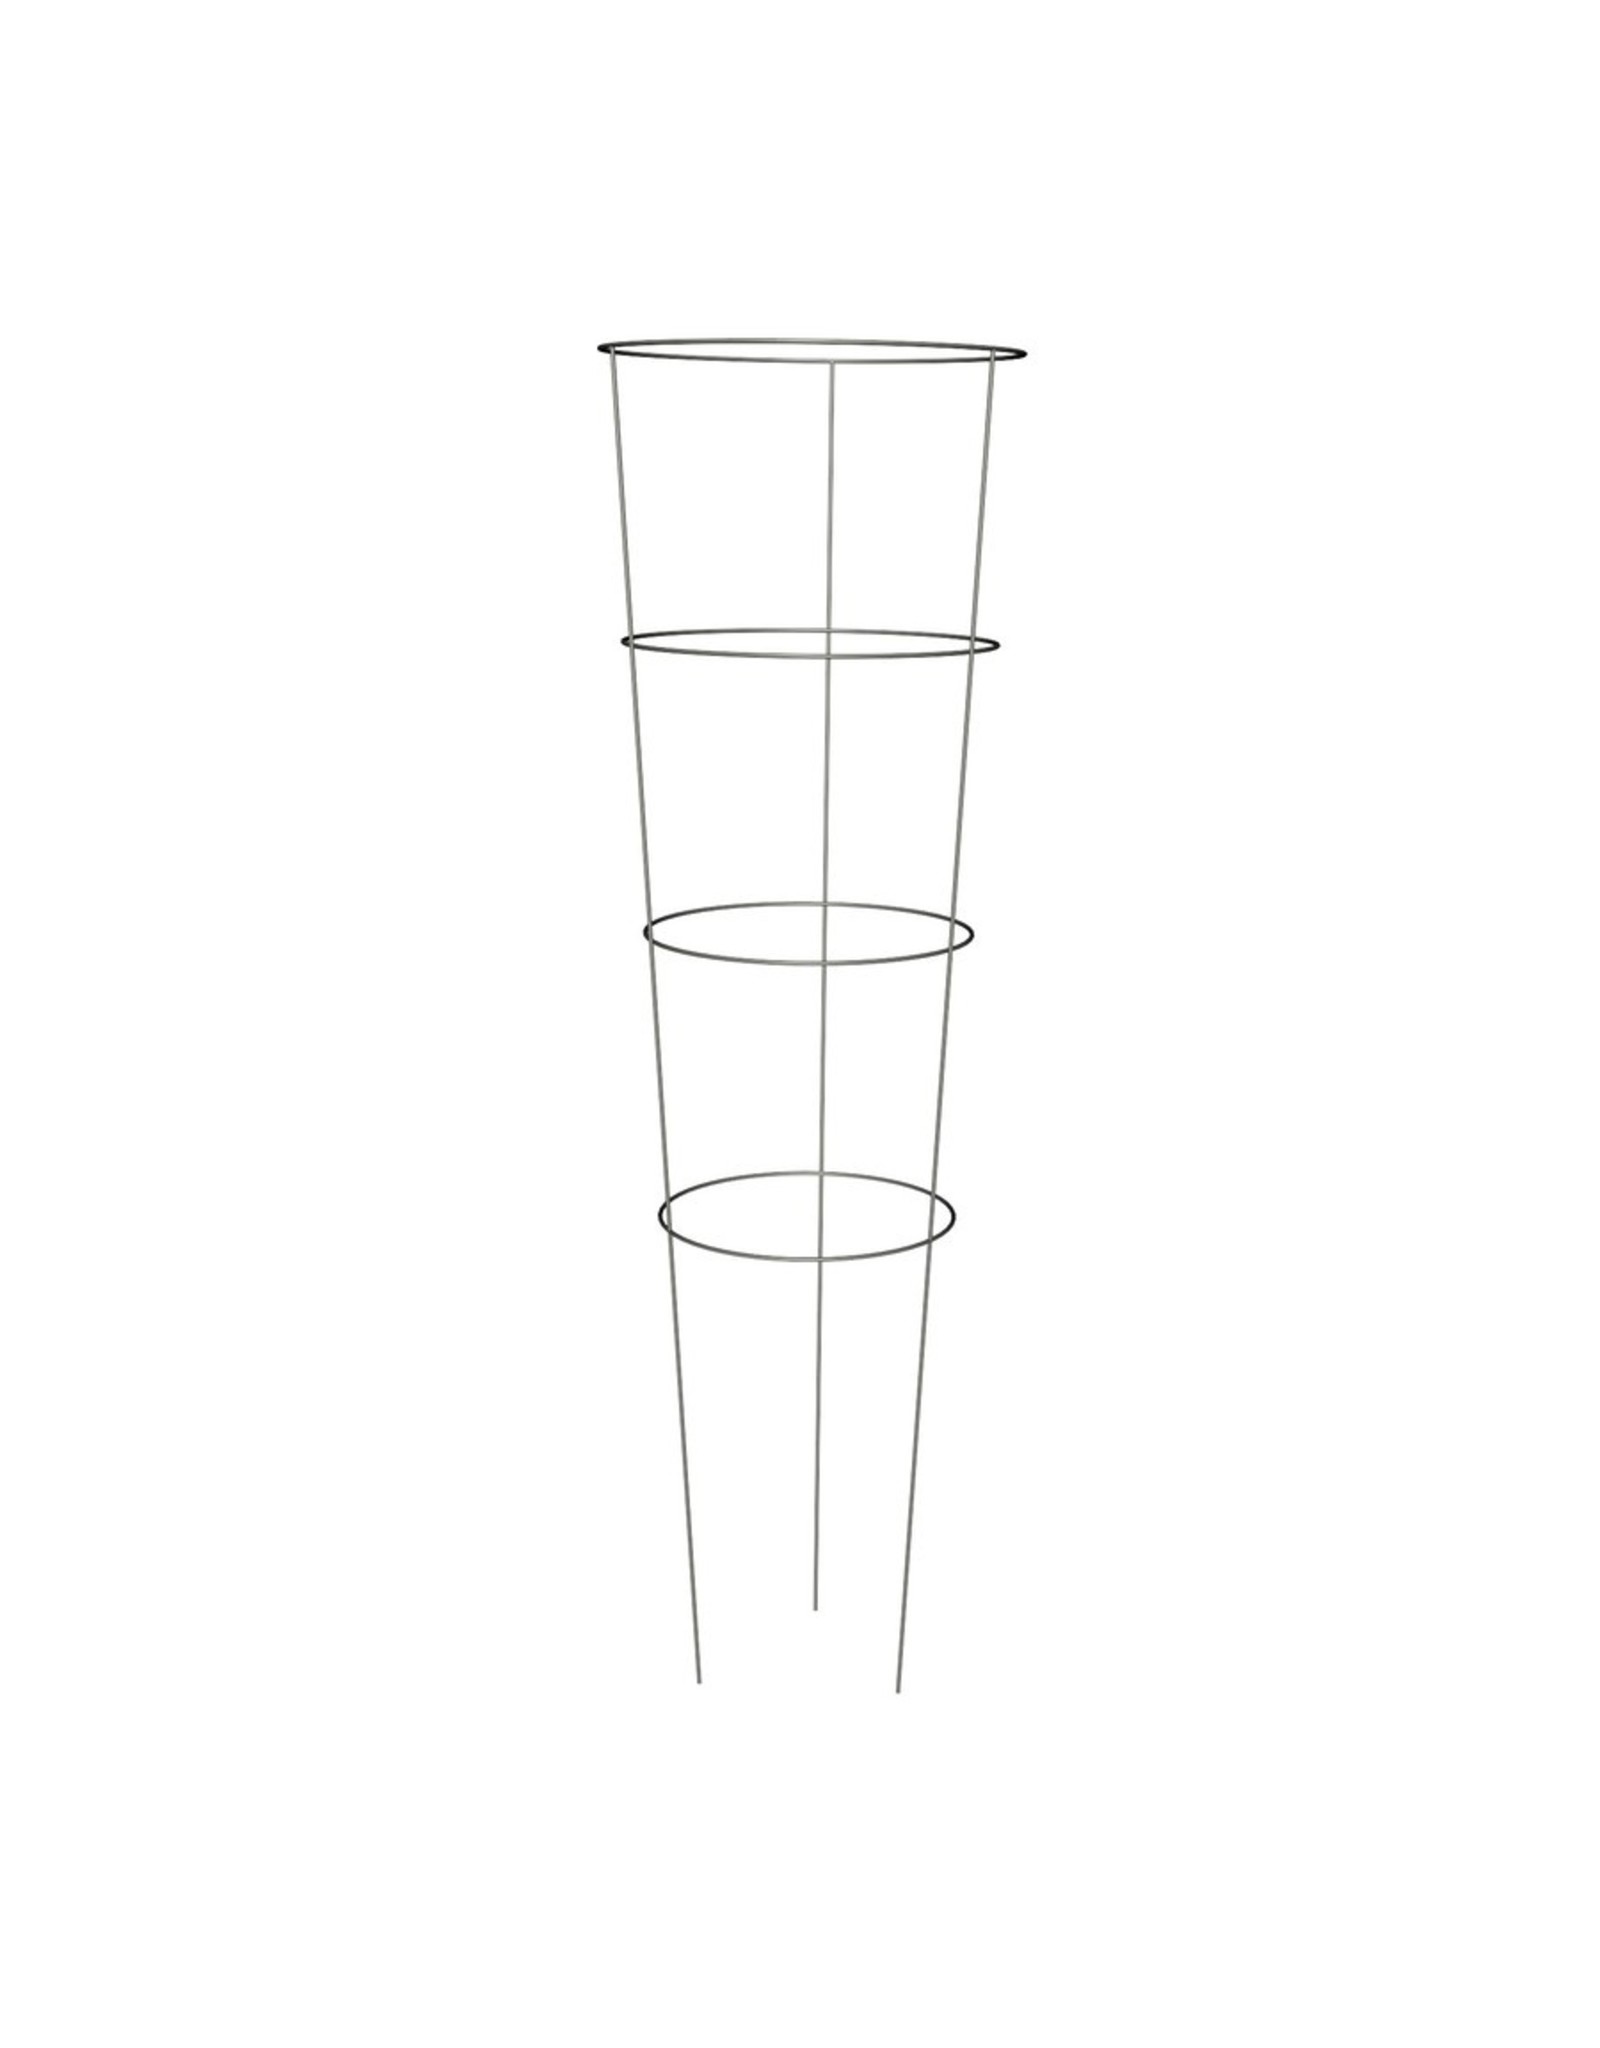 Tomato Cage 42.00 11.5 GA 4 Rings 3 Legs - Plant Cages, Plant Support & Anchors